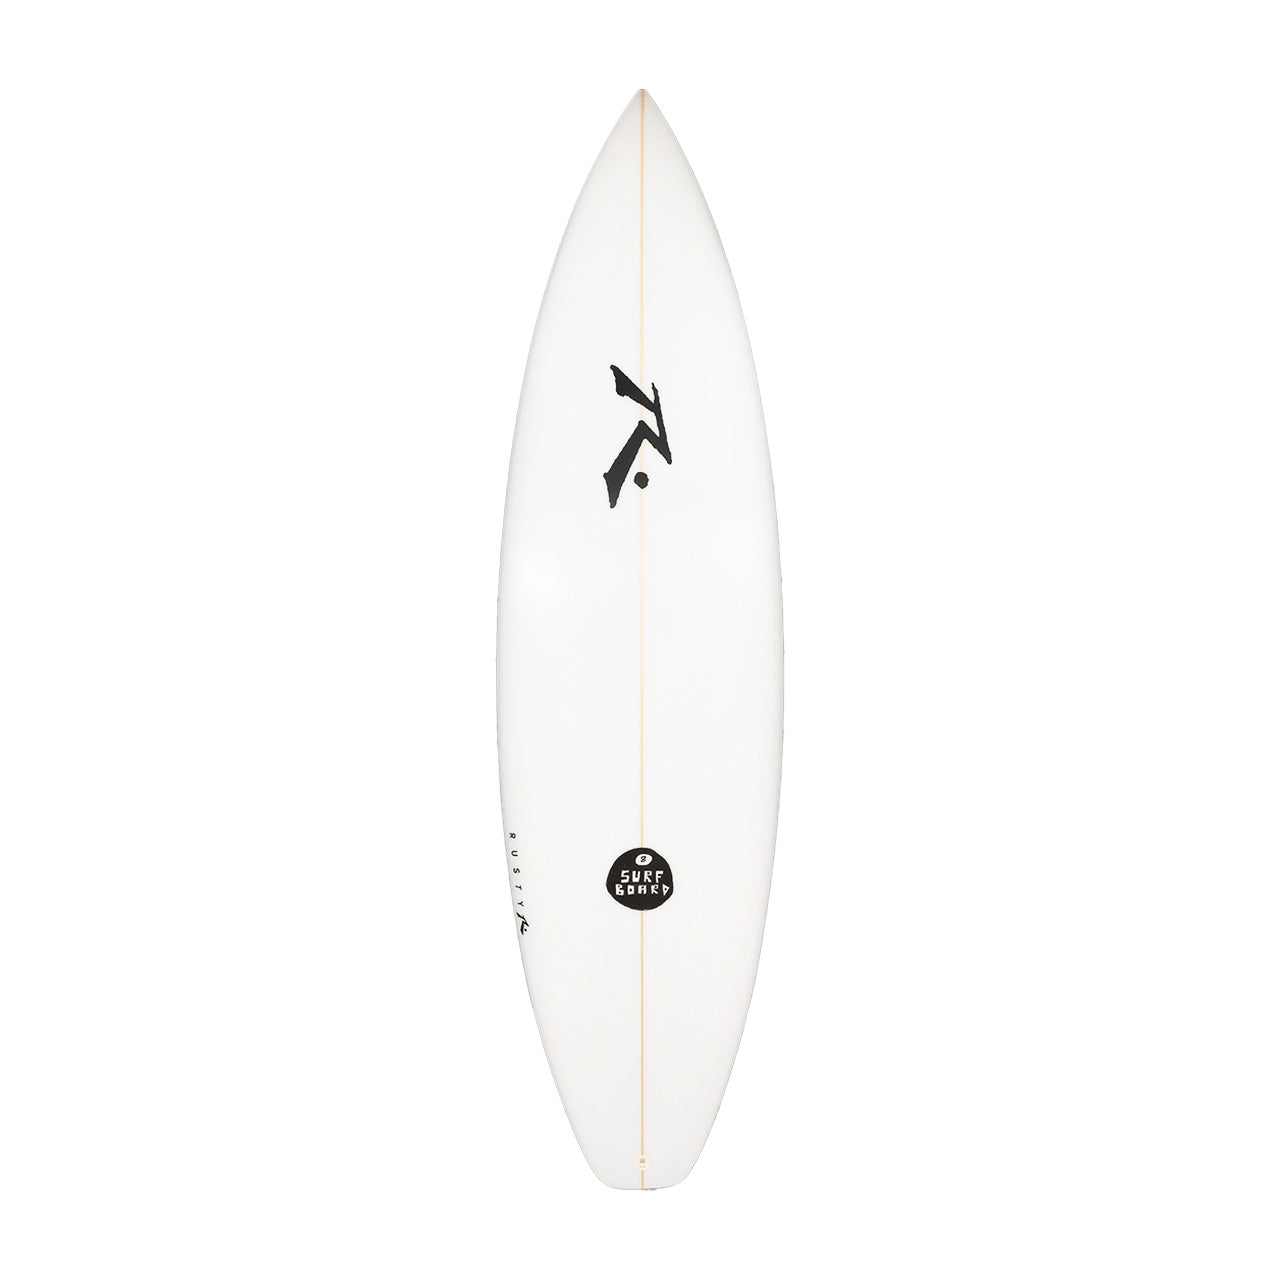 Model 8 High Performance Shortboard - Deck View - Rusty Surfboards